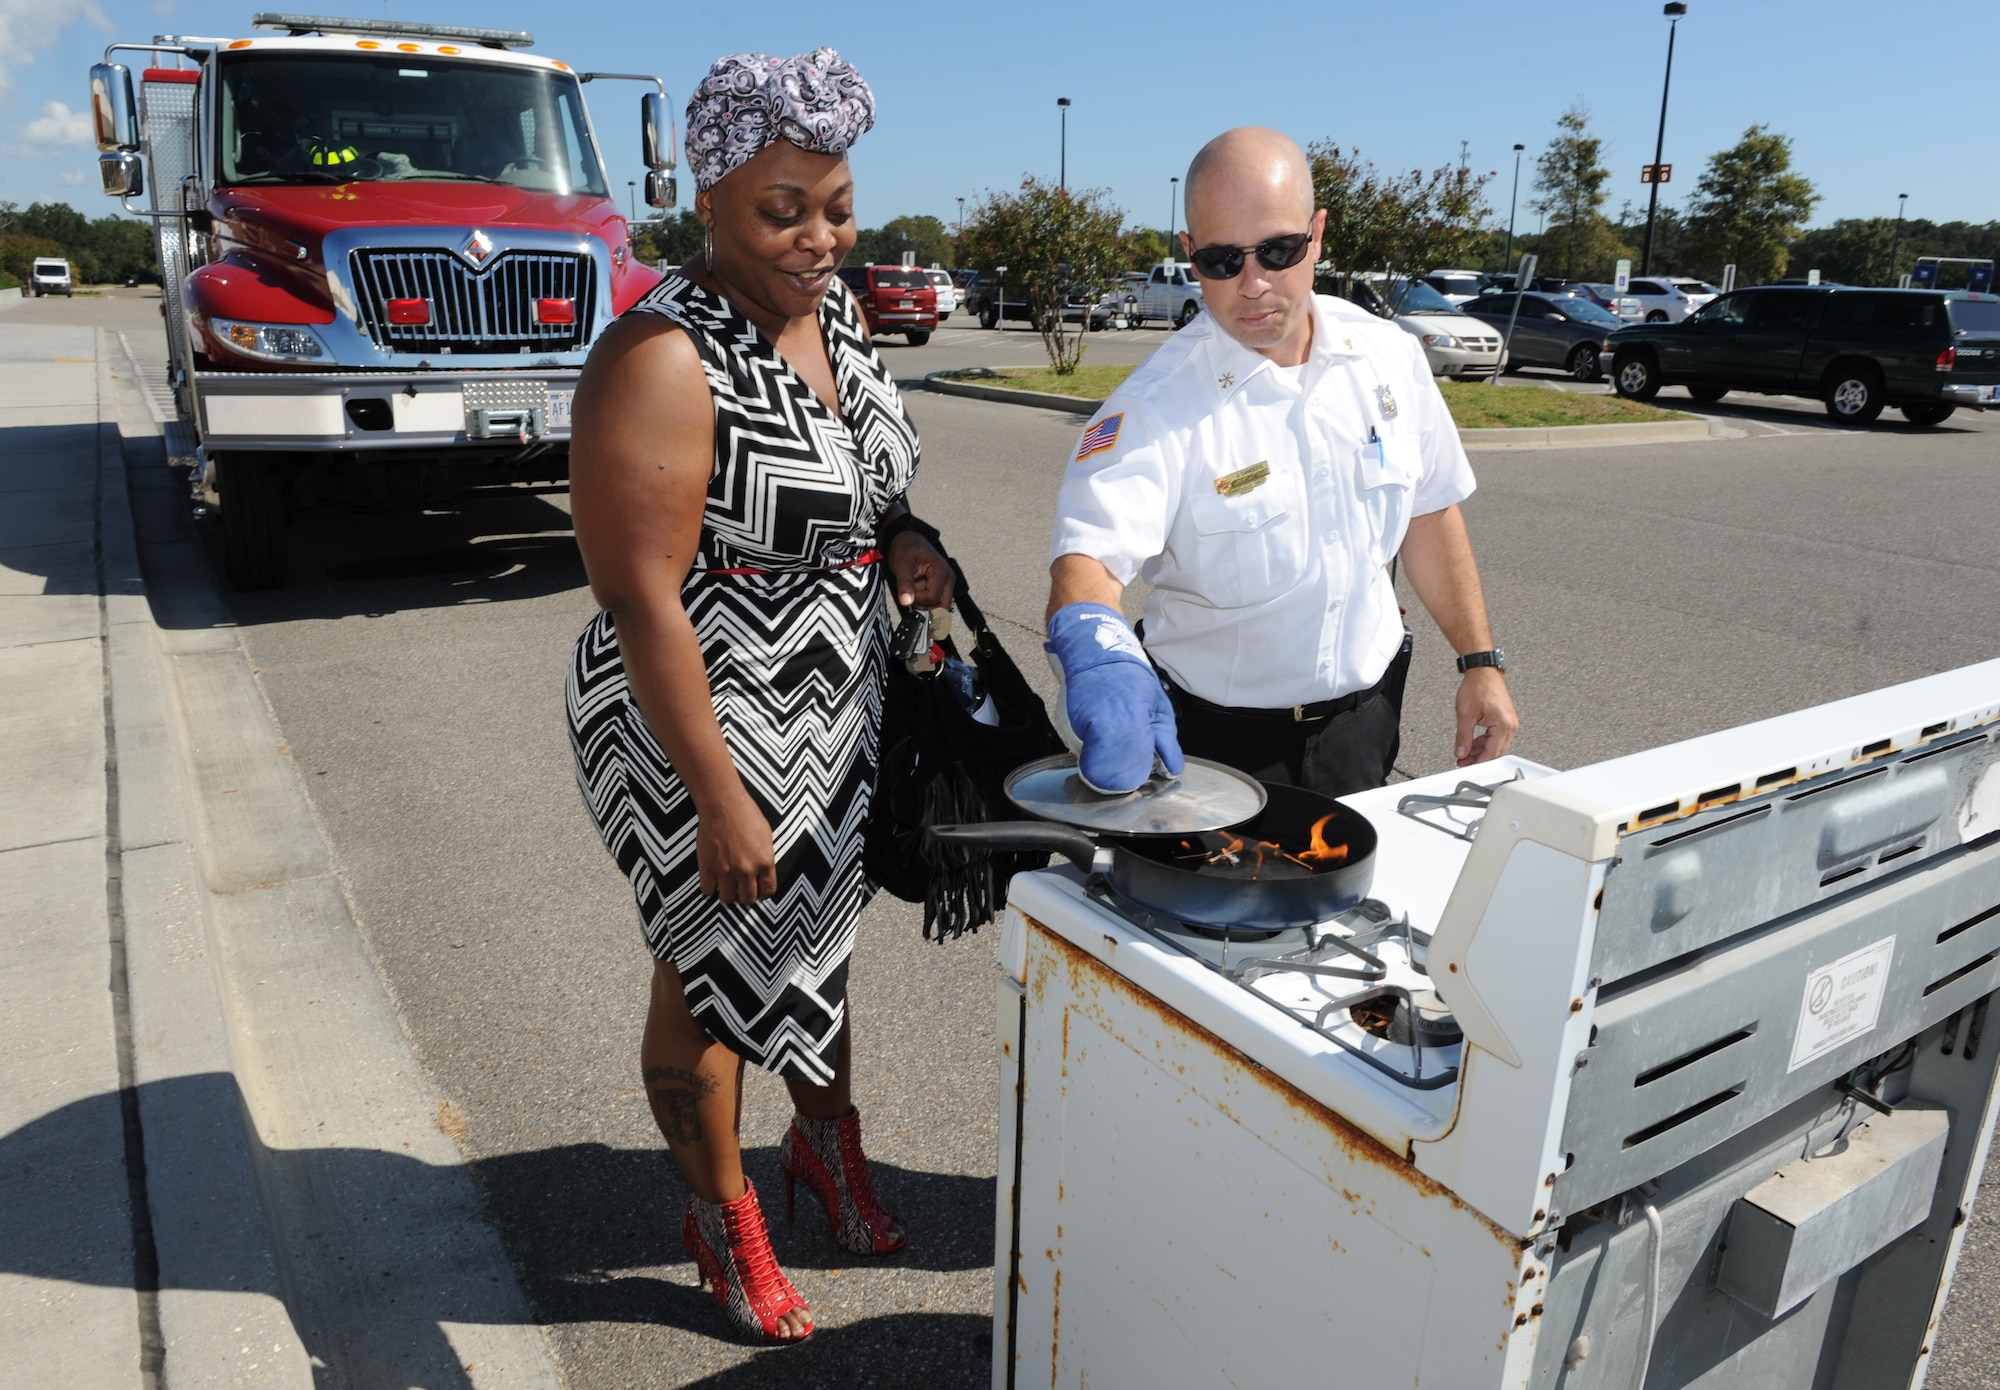 Jason Sanders, 81st Infrastructure Division fire prevention assistant chief, demonstrates how to safely put out a stove fire to Ieasha Sims, Keesler Base Exchange sales associate, during Fire Prevention Week outside of the Base Exchange Oct. 11, 2016, on Keesler Air Force Base, Miss. The week-long event included fire drills, literature hand-outs and stove fire demonstrations around the base and concludes with an open house at the fire department. (U.S. Air Force photo by Kemberly Groue/Released)